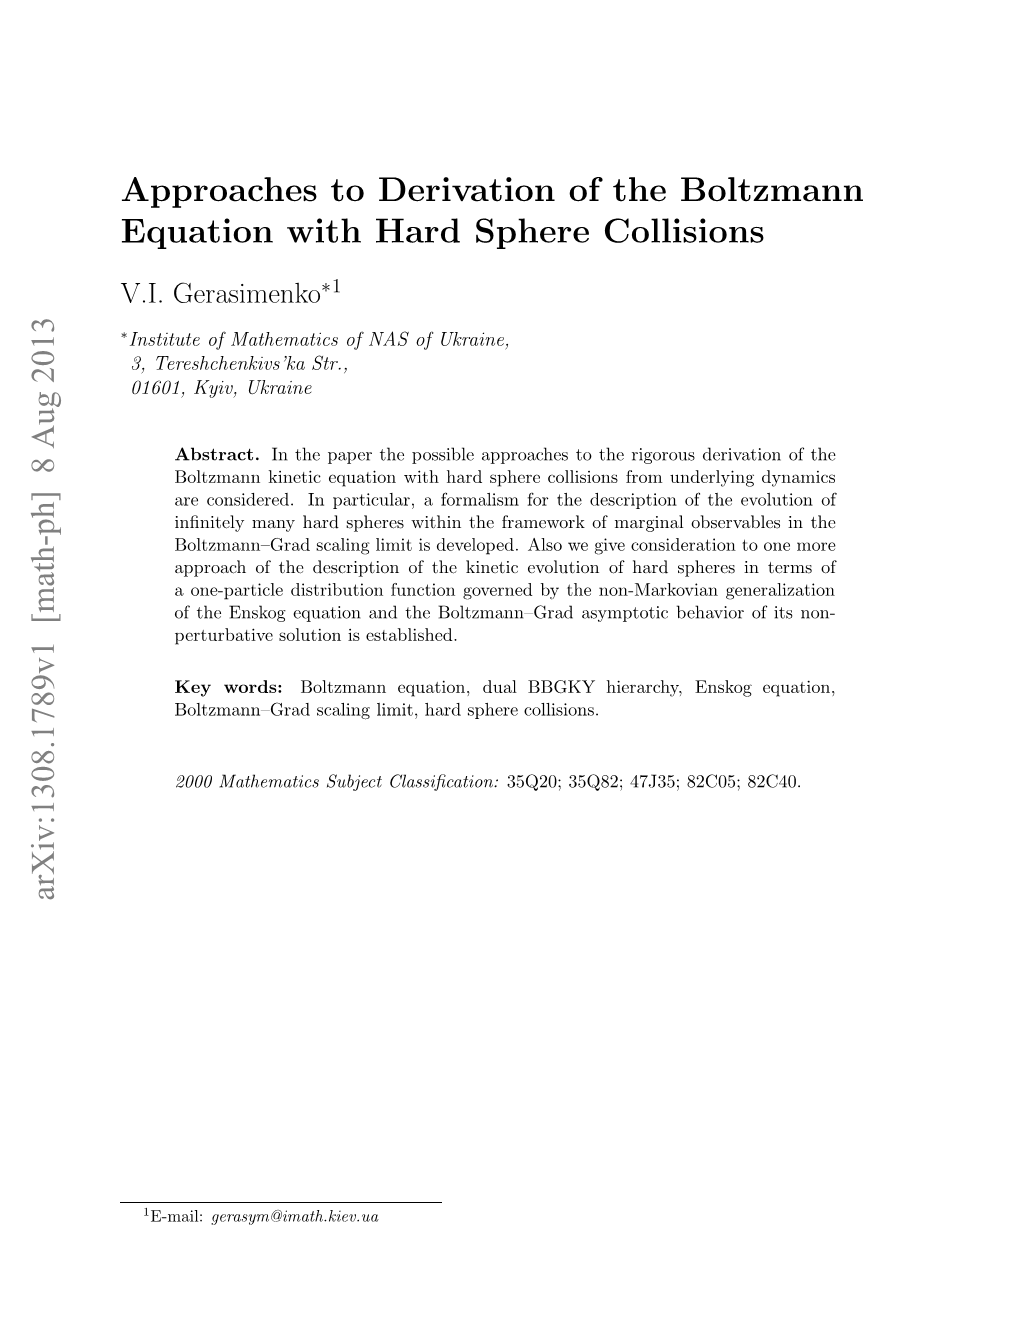 Approaches to Derivation of the Boltzmann Equation with Hard